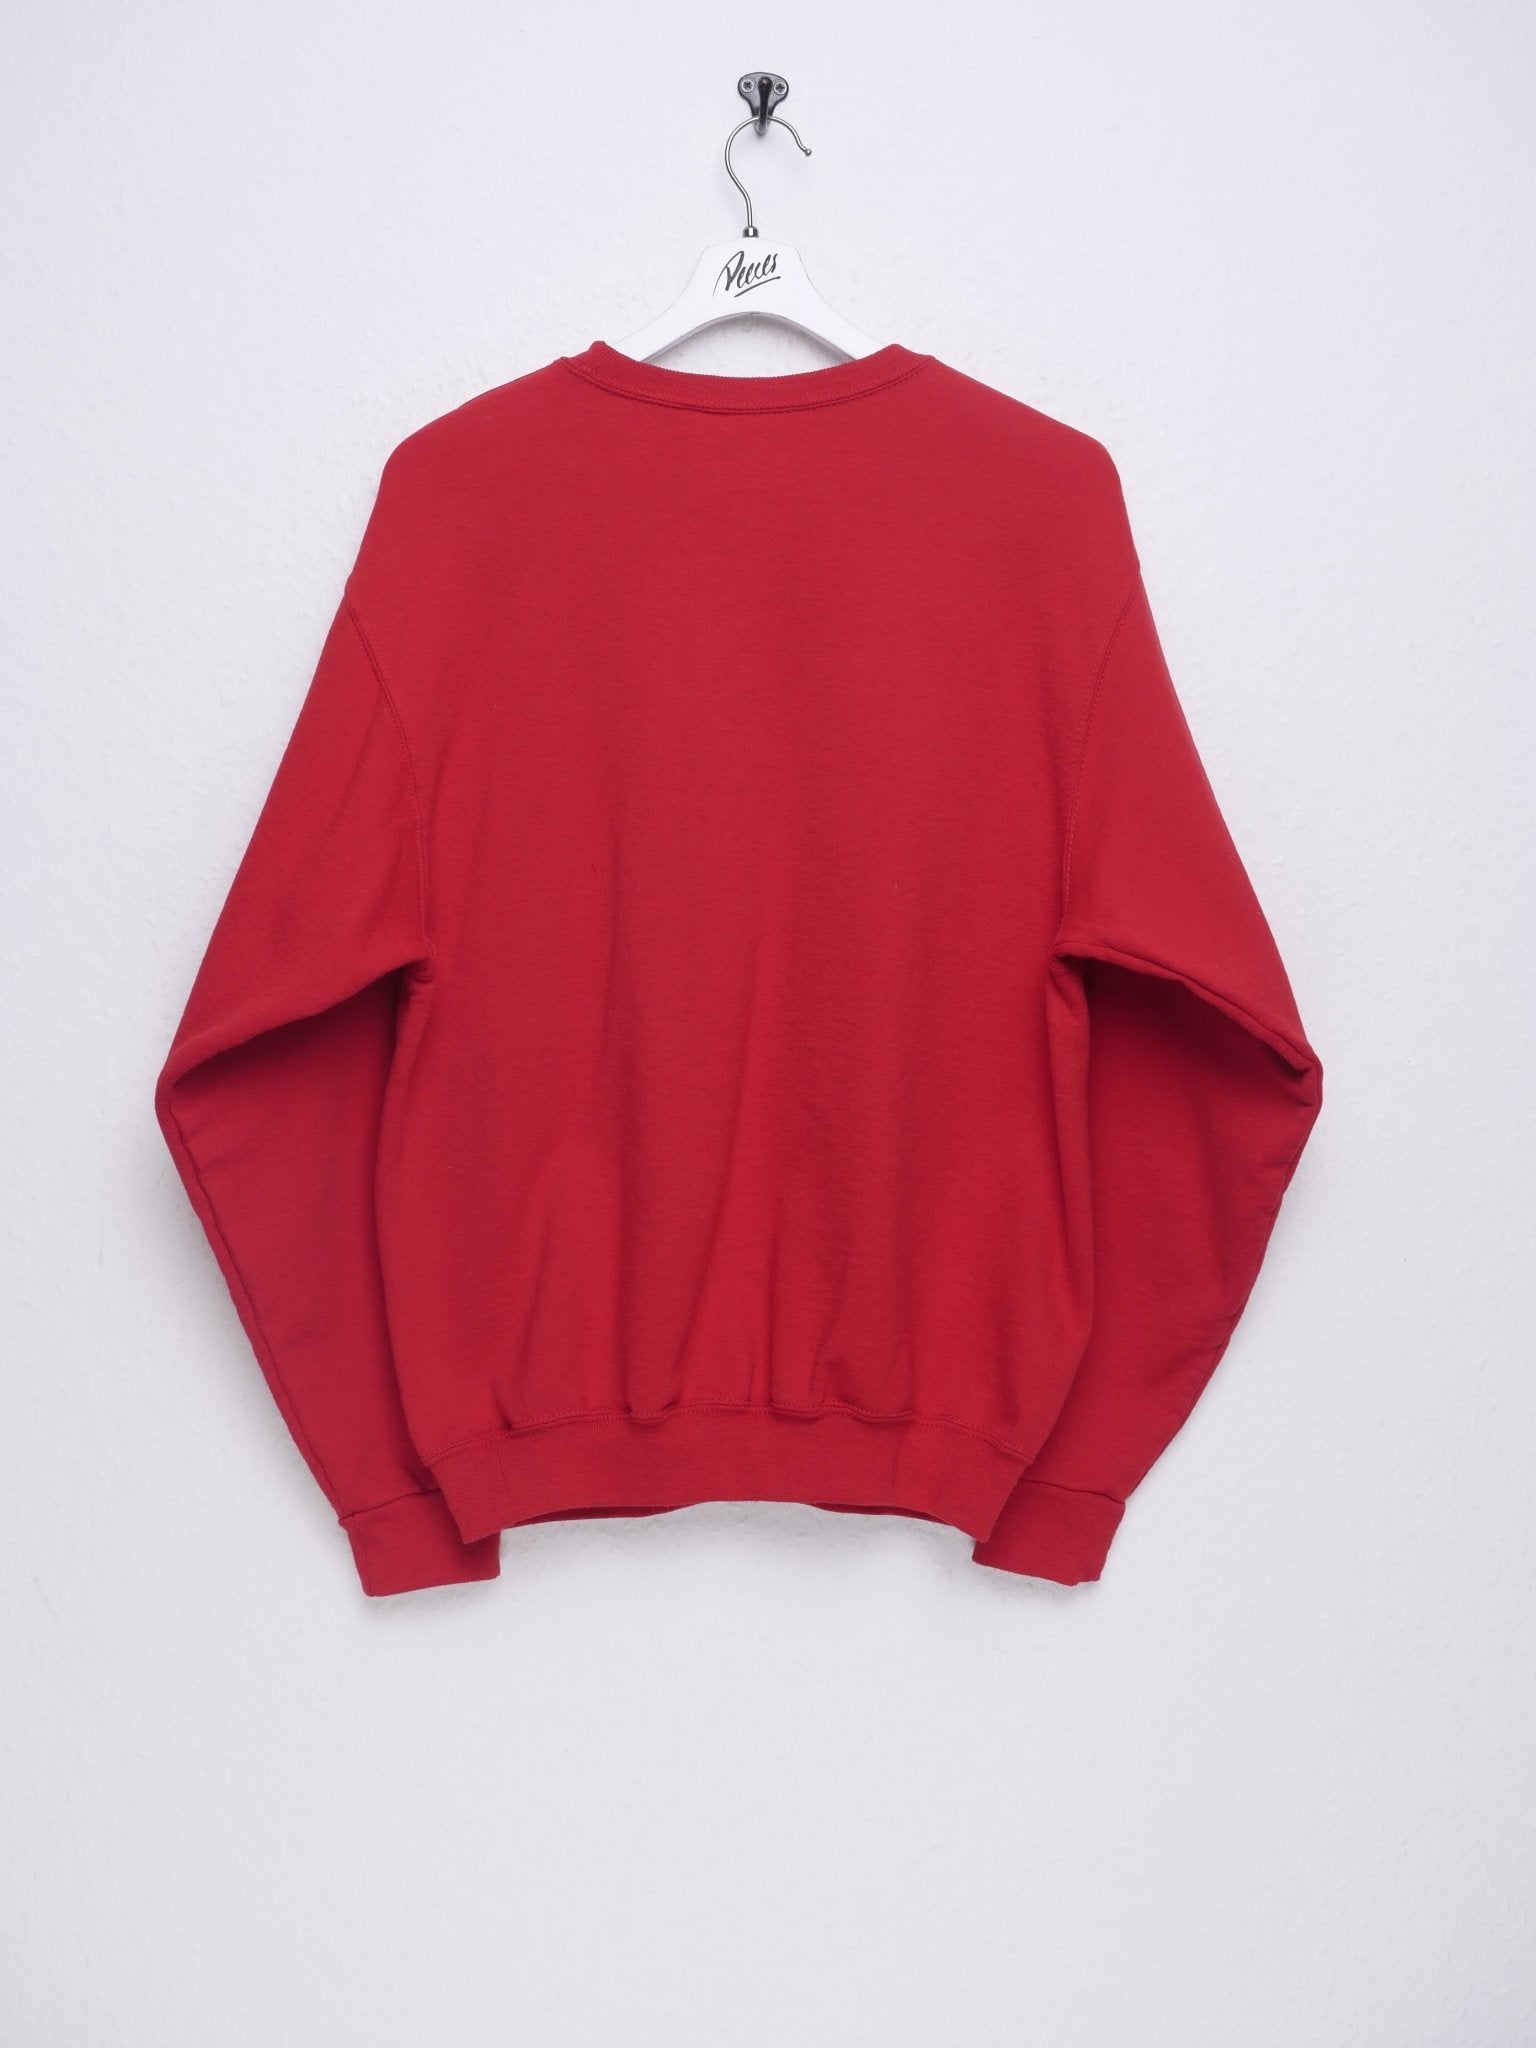 plain red Sweater - Peeces